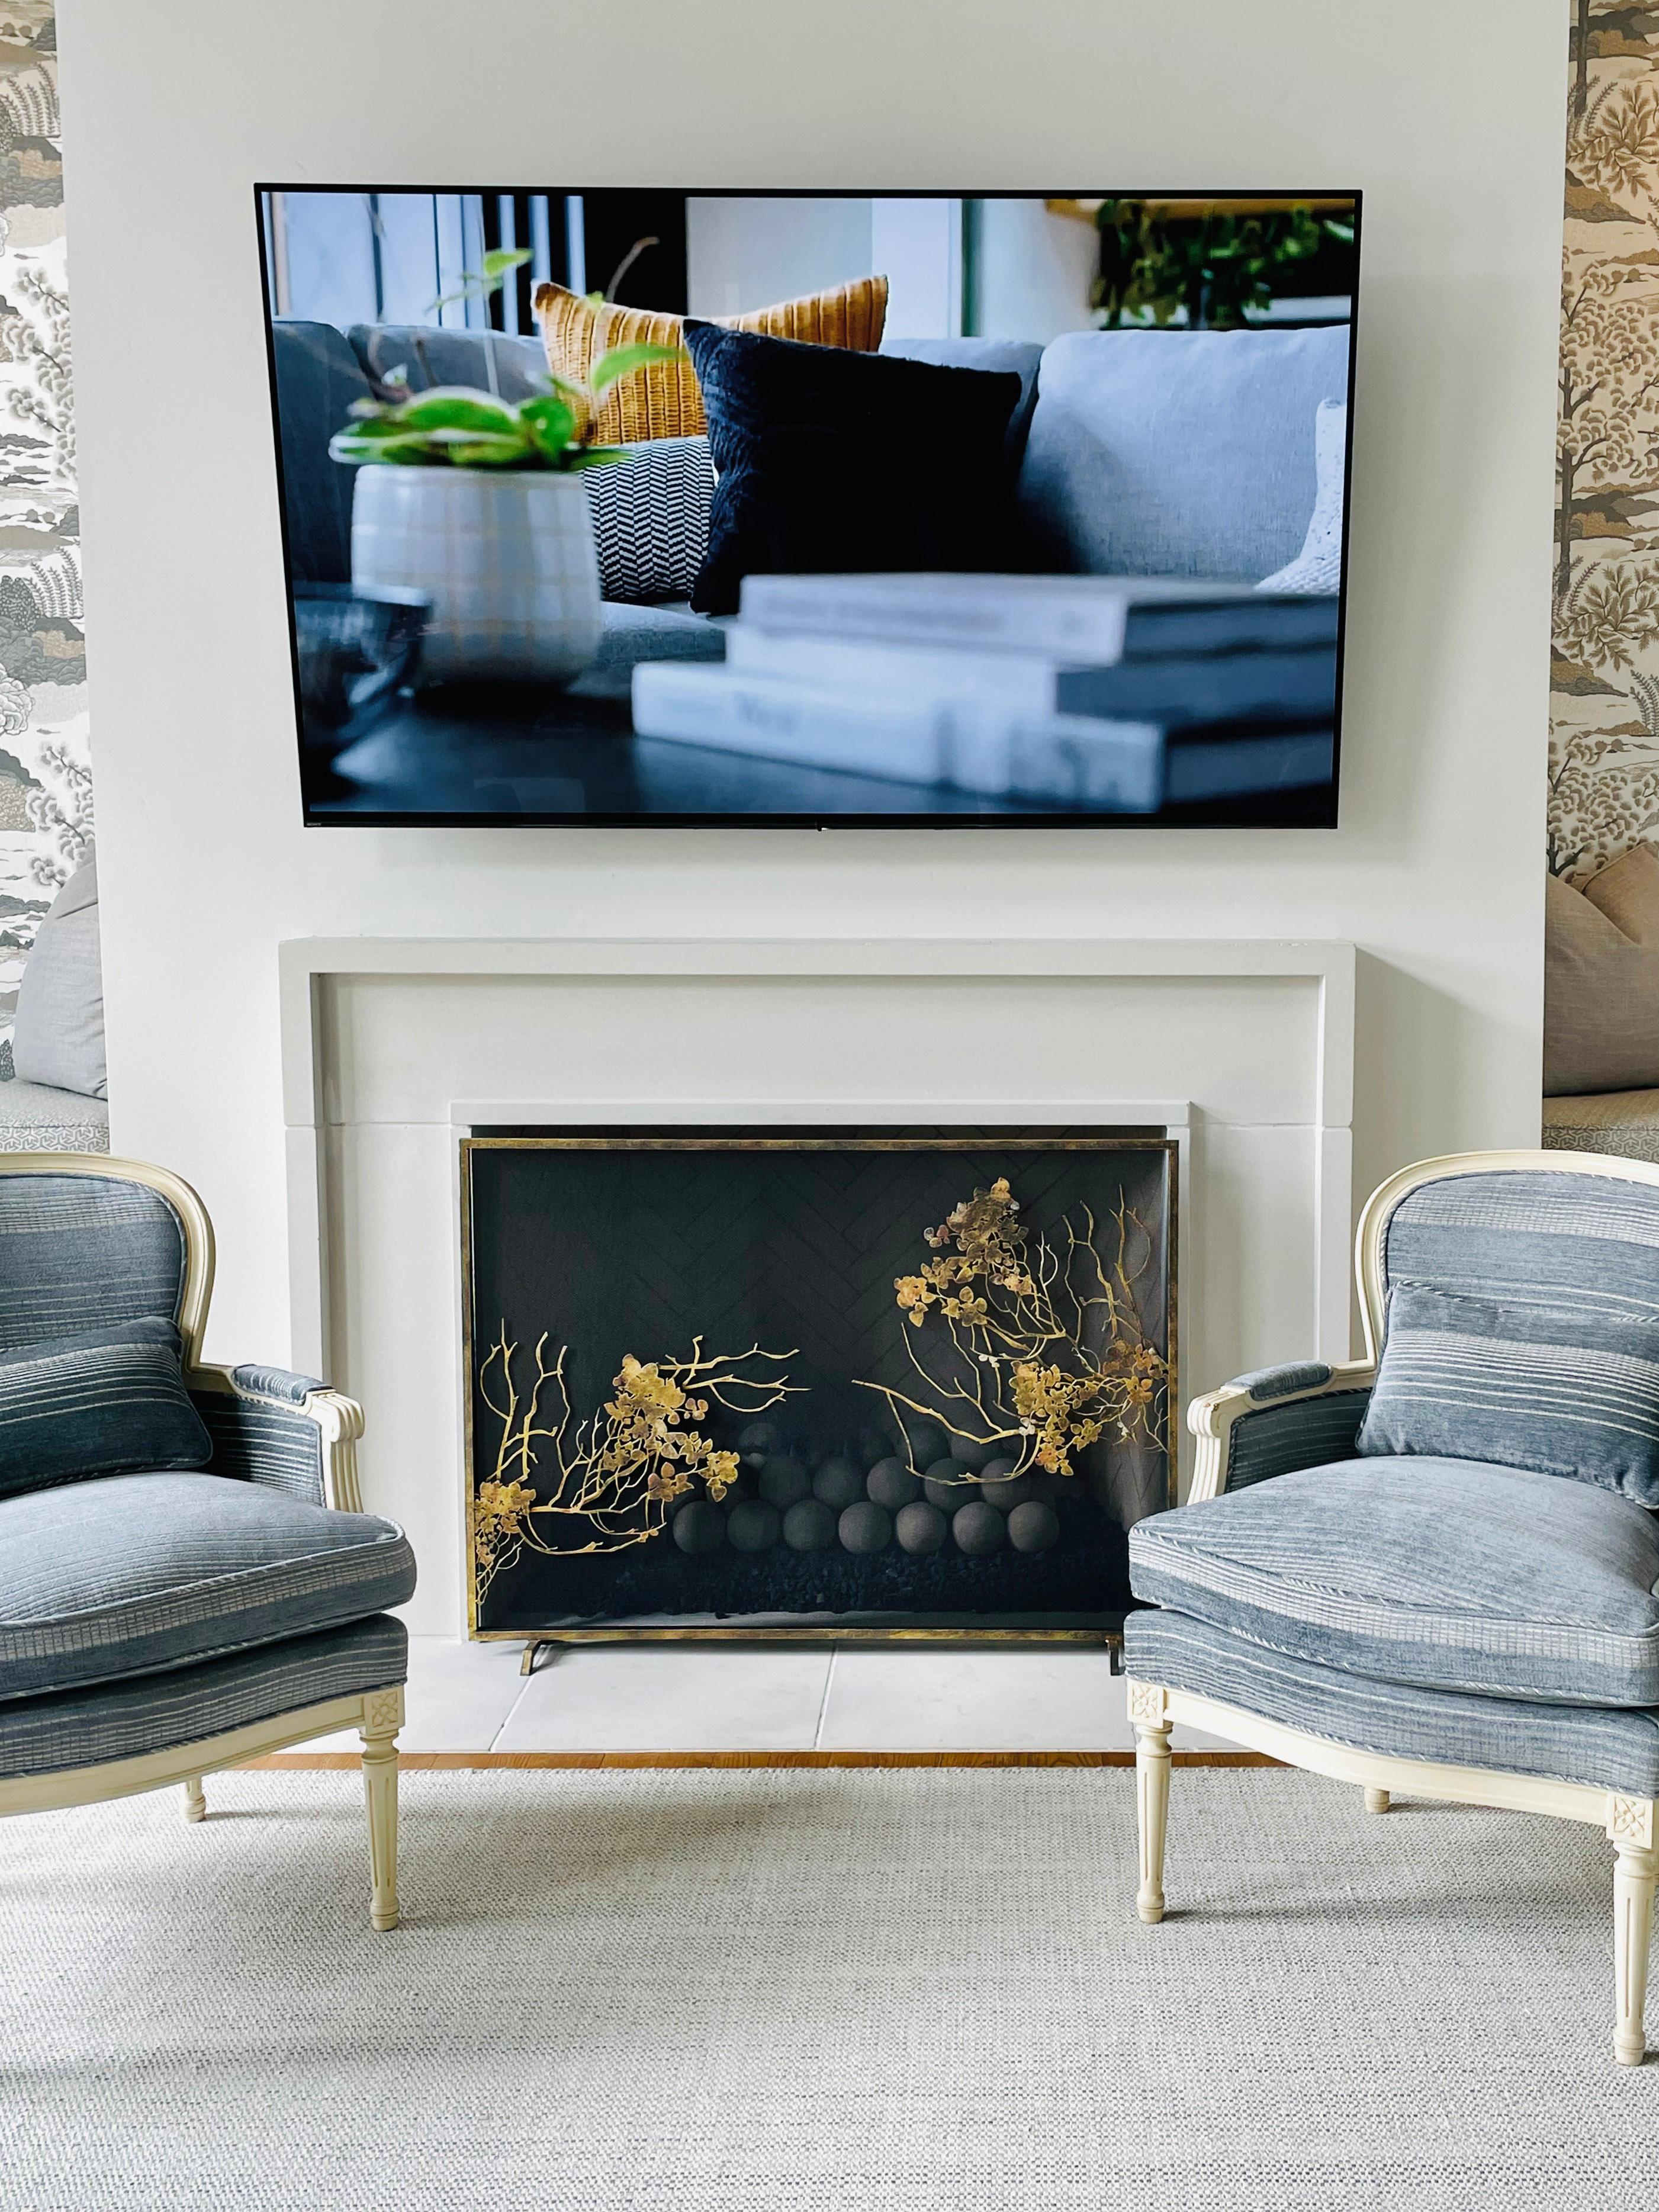 The Madalyn fireplace screen lends a soft natural touch to the fireplace, with individual layers of branches and leaves. Handmade of plasma-cut and forged iron, each component is artfully placed by an American metal artisan to create a one-of-a-kind